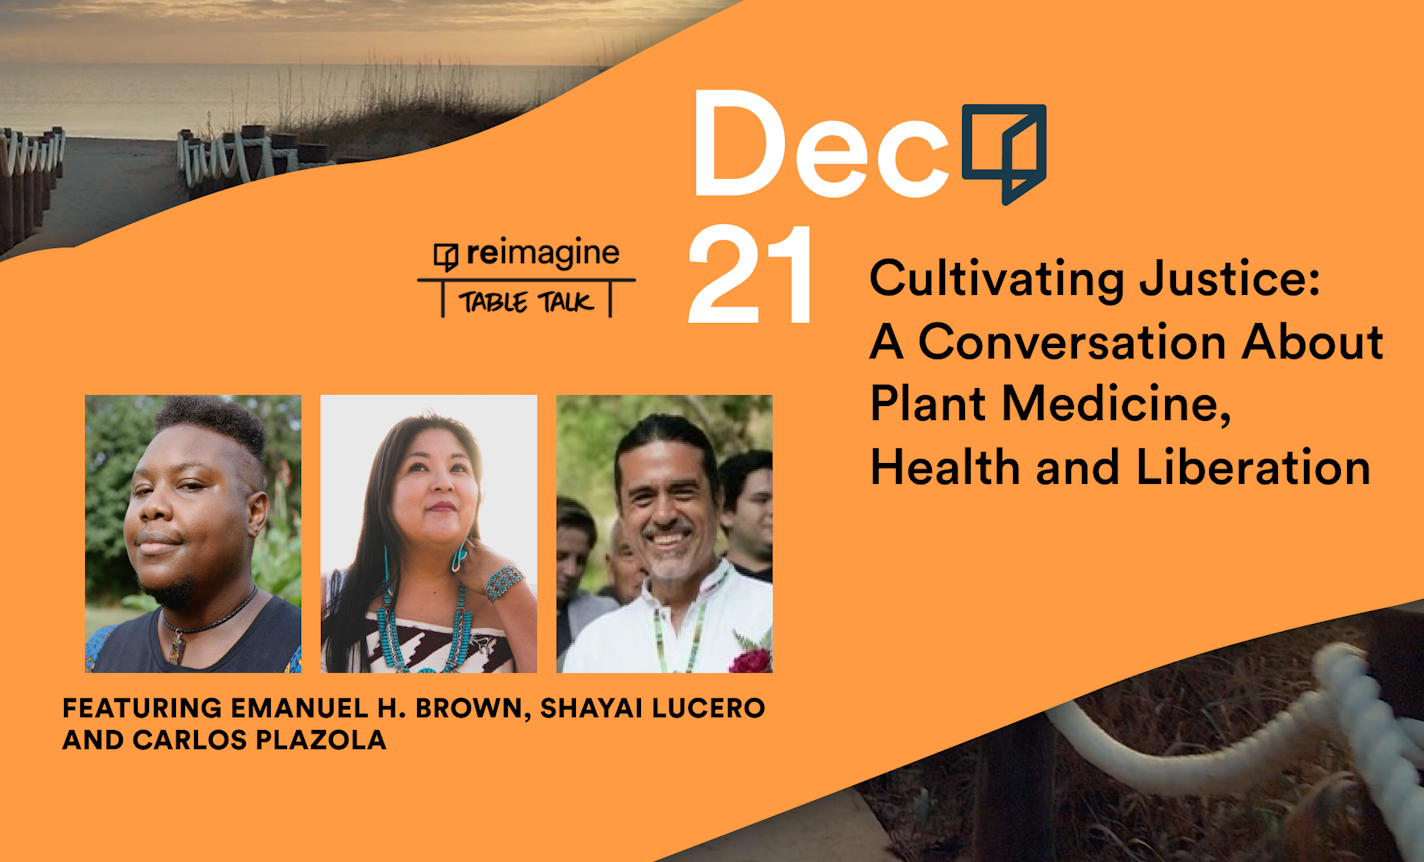 Cultivating Justice: A Conversation About Plant Medicine, Health and Liberation